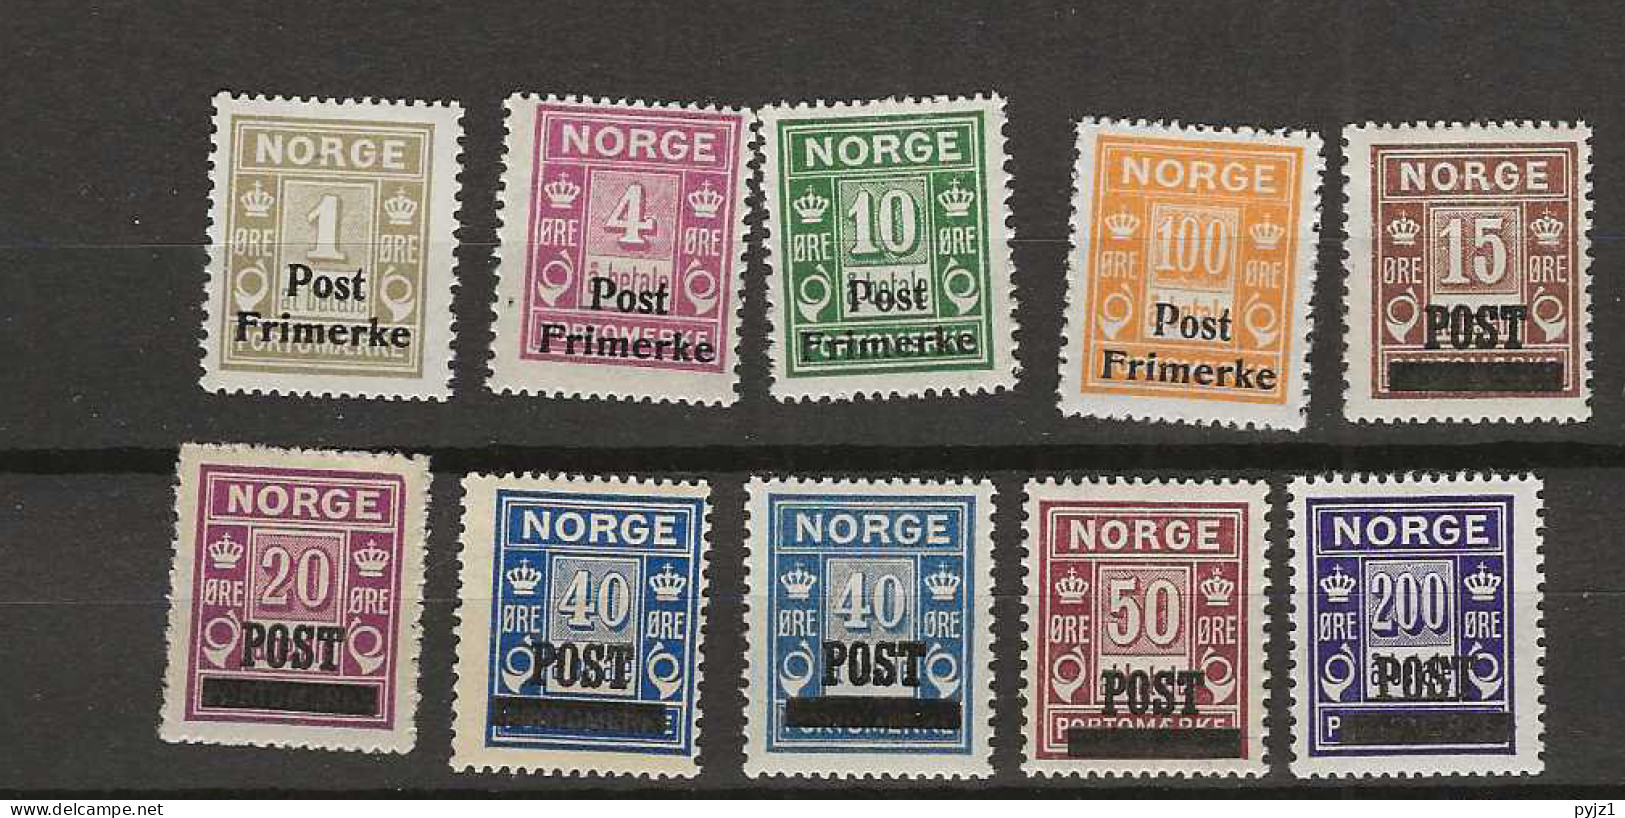 1929 MNH Norway Mi 141-149 (20 Ore Is MH/*) Including Both Shades Of 40 Ore - Nuovi